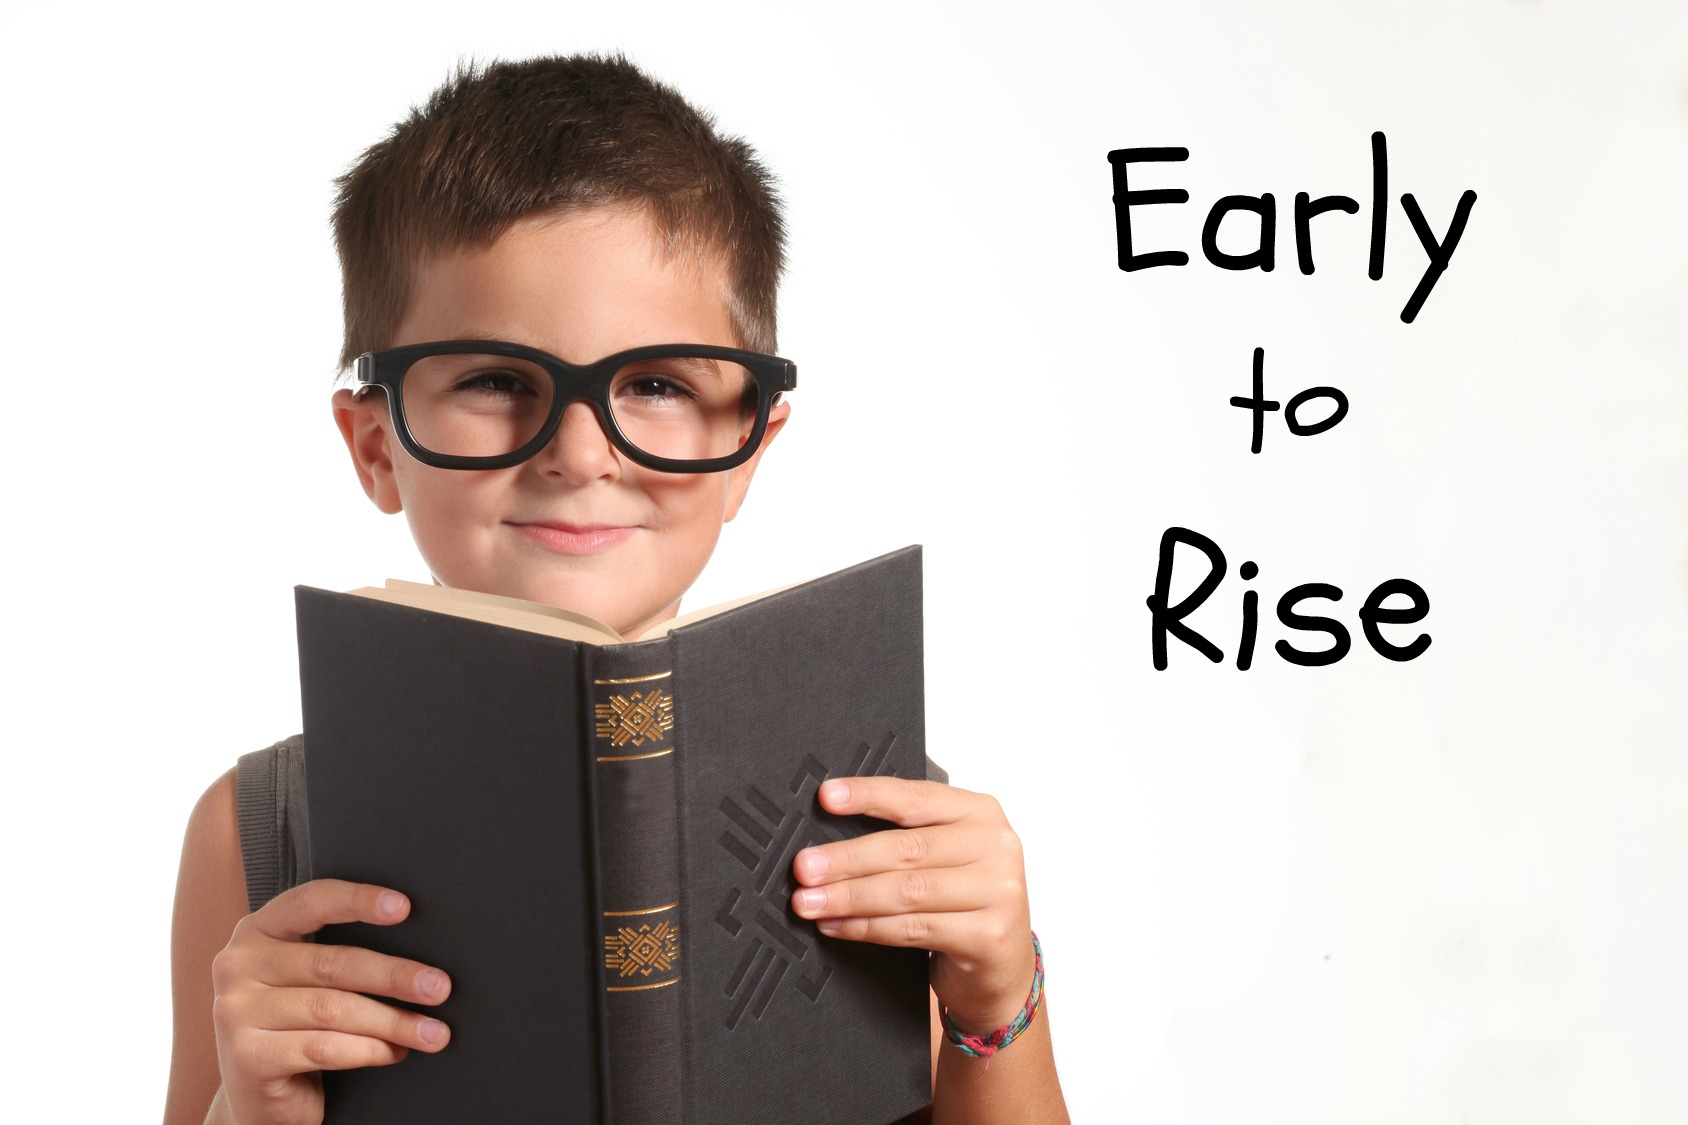 Early to rise: facts about child prodigies. 